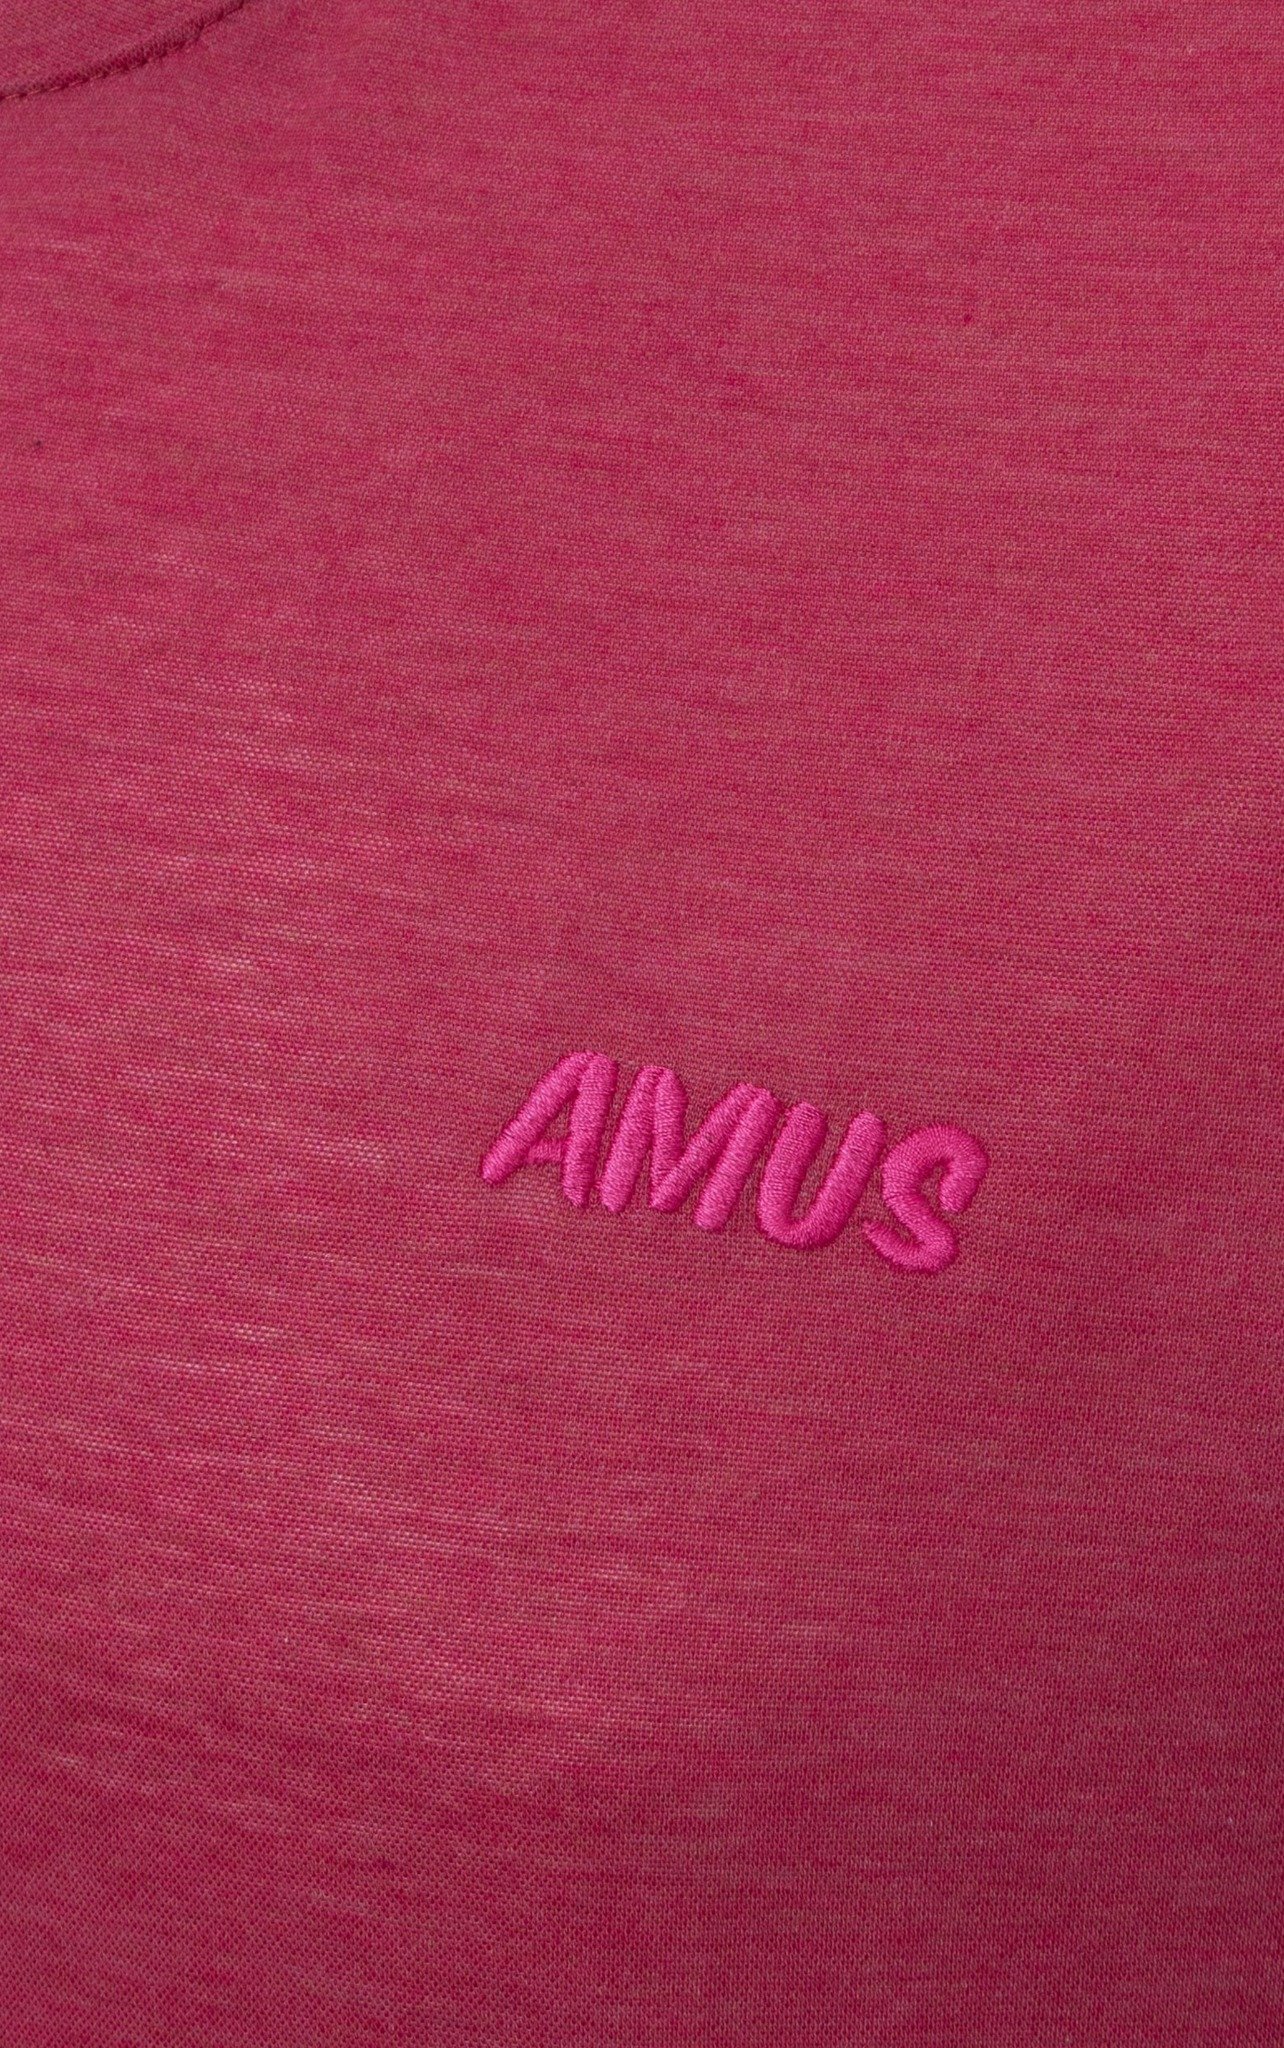 AG60 FACTORY REGULAR FIT EMBROIDERED "AMUS" T-SHIRT - PINK